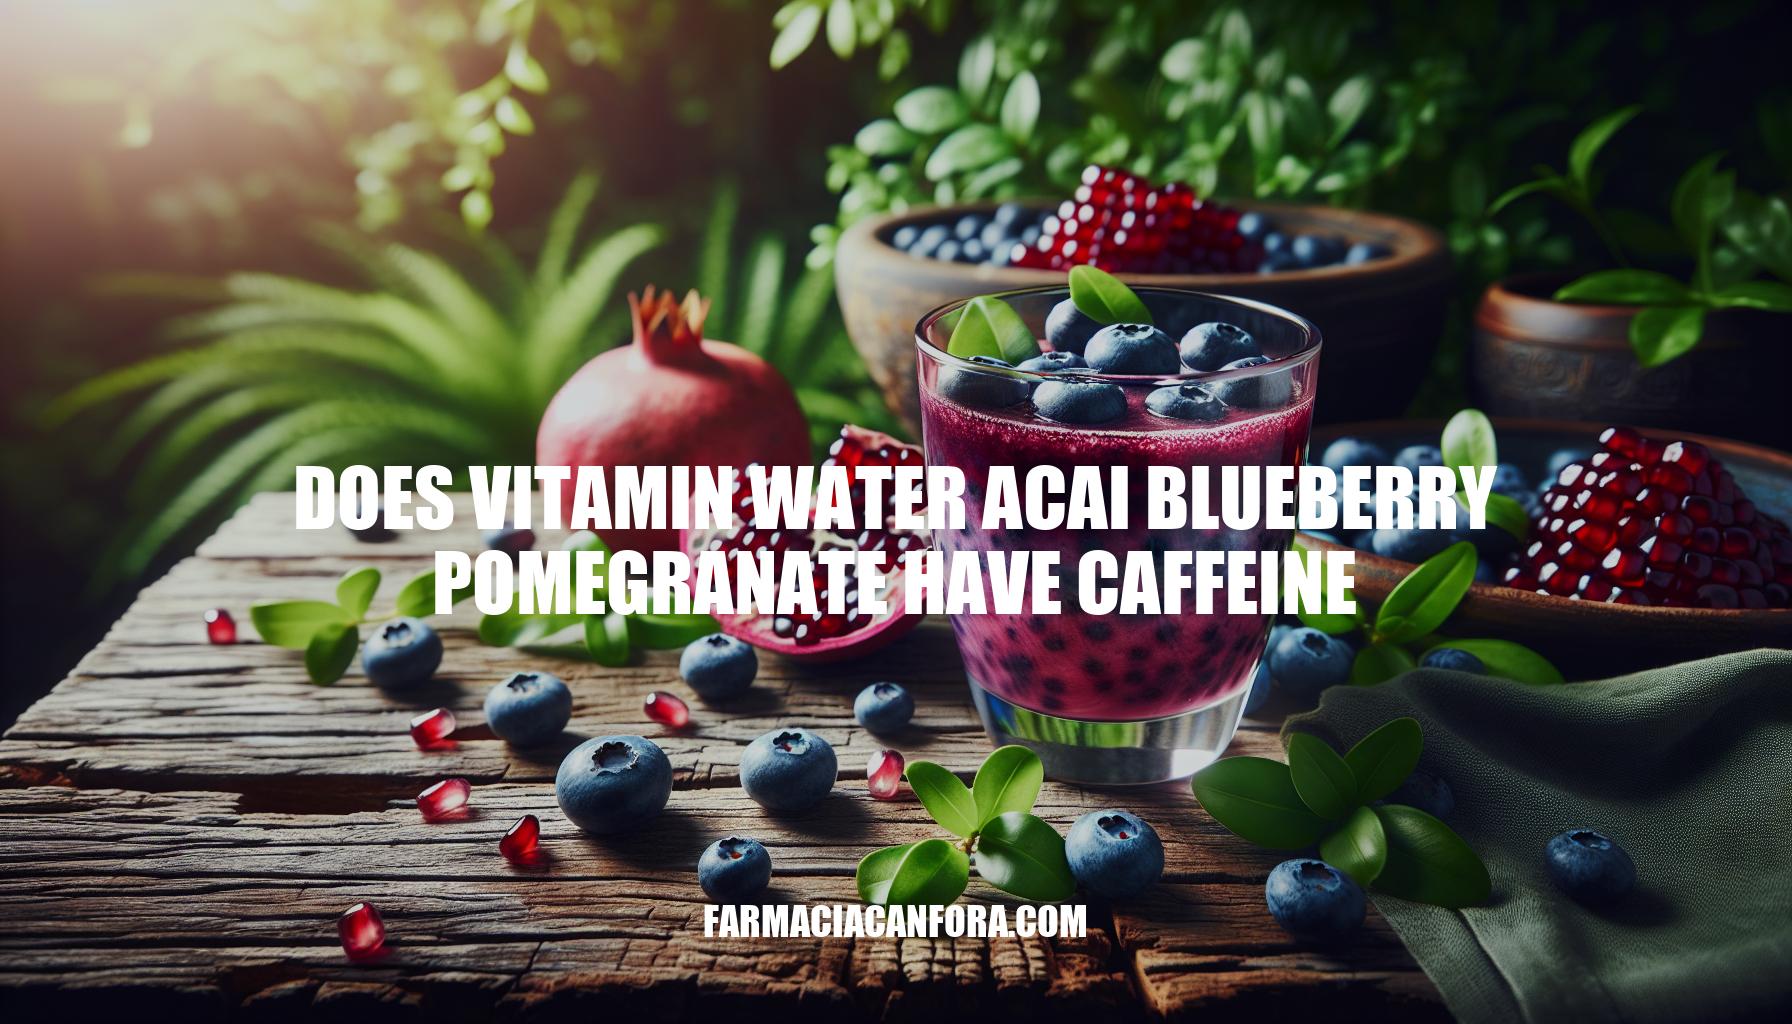 Does Vitamin Water Acai Blueberry Pomegranate Have Caffeine? Unveiling the Truth